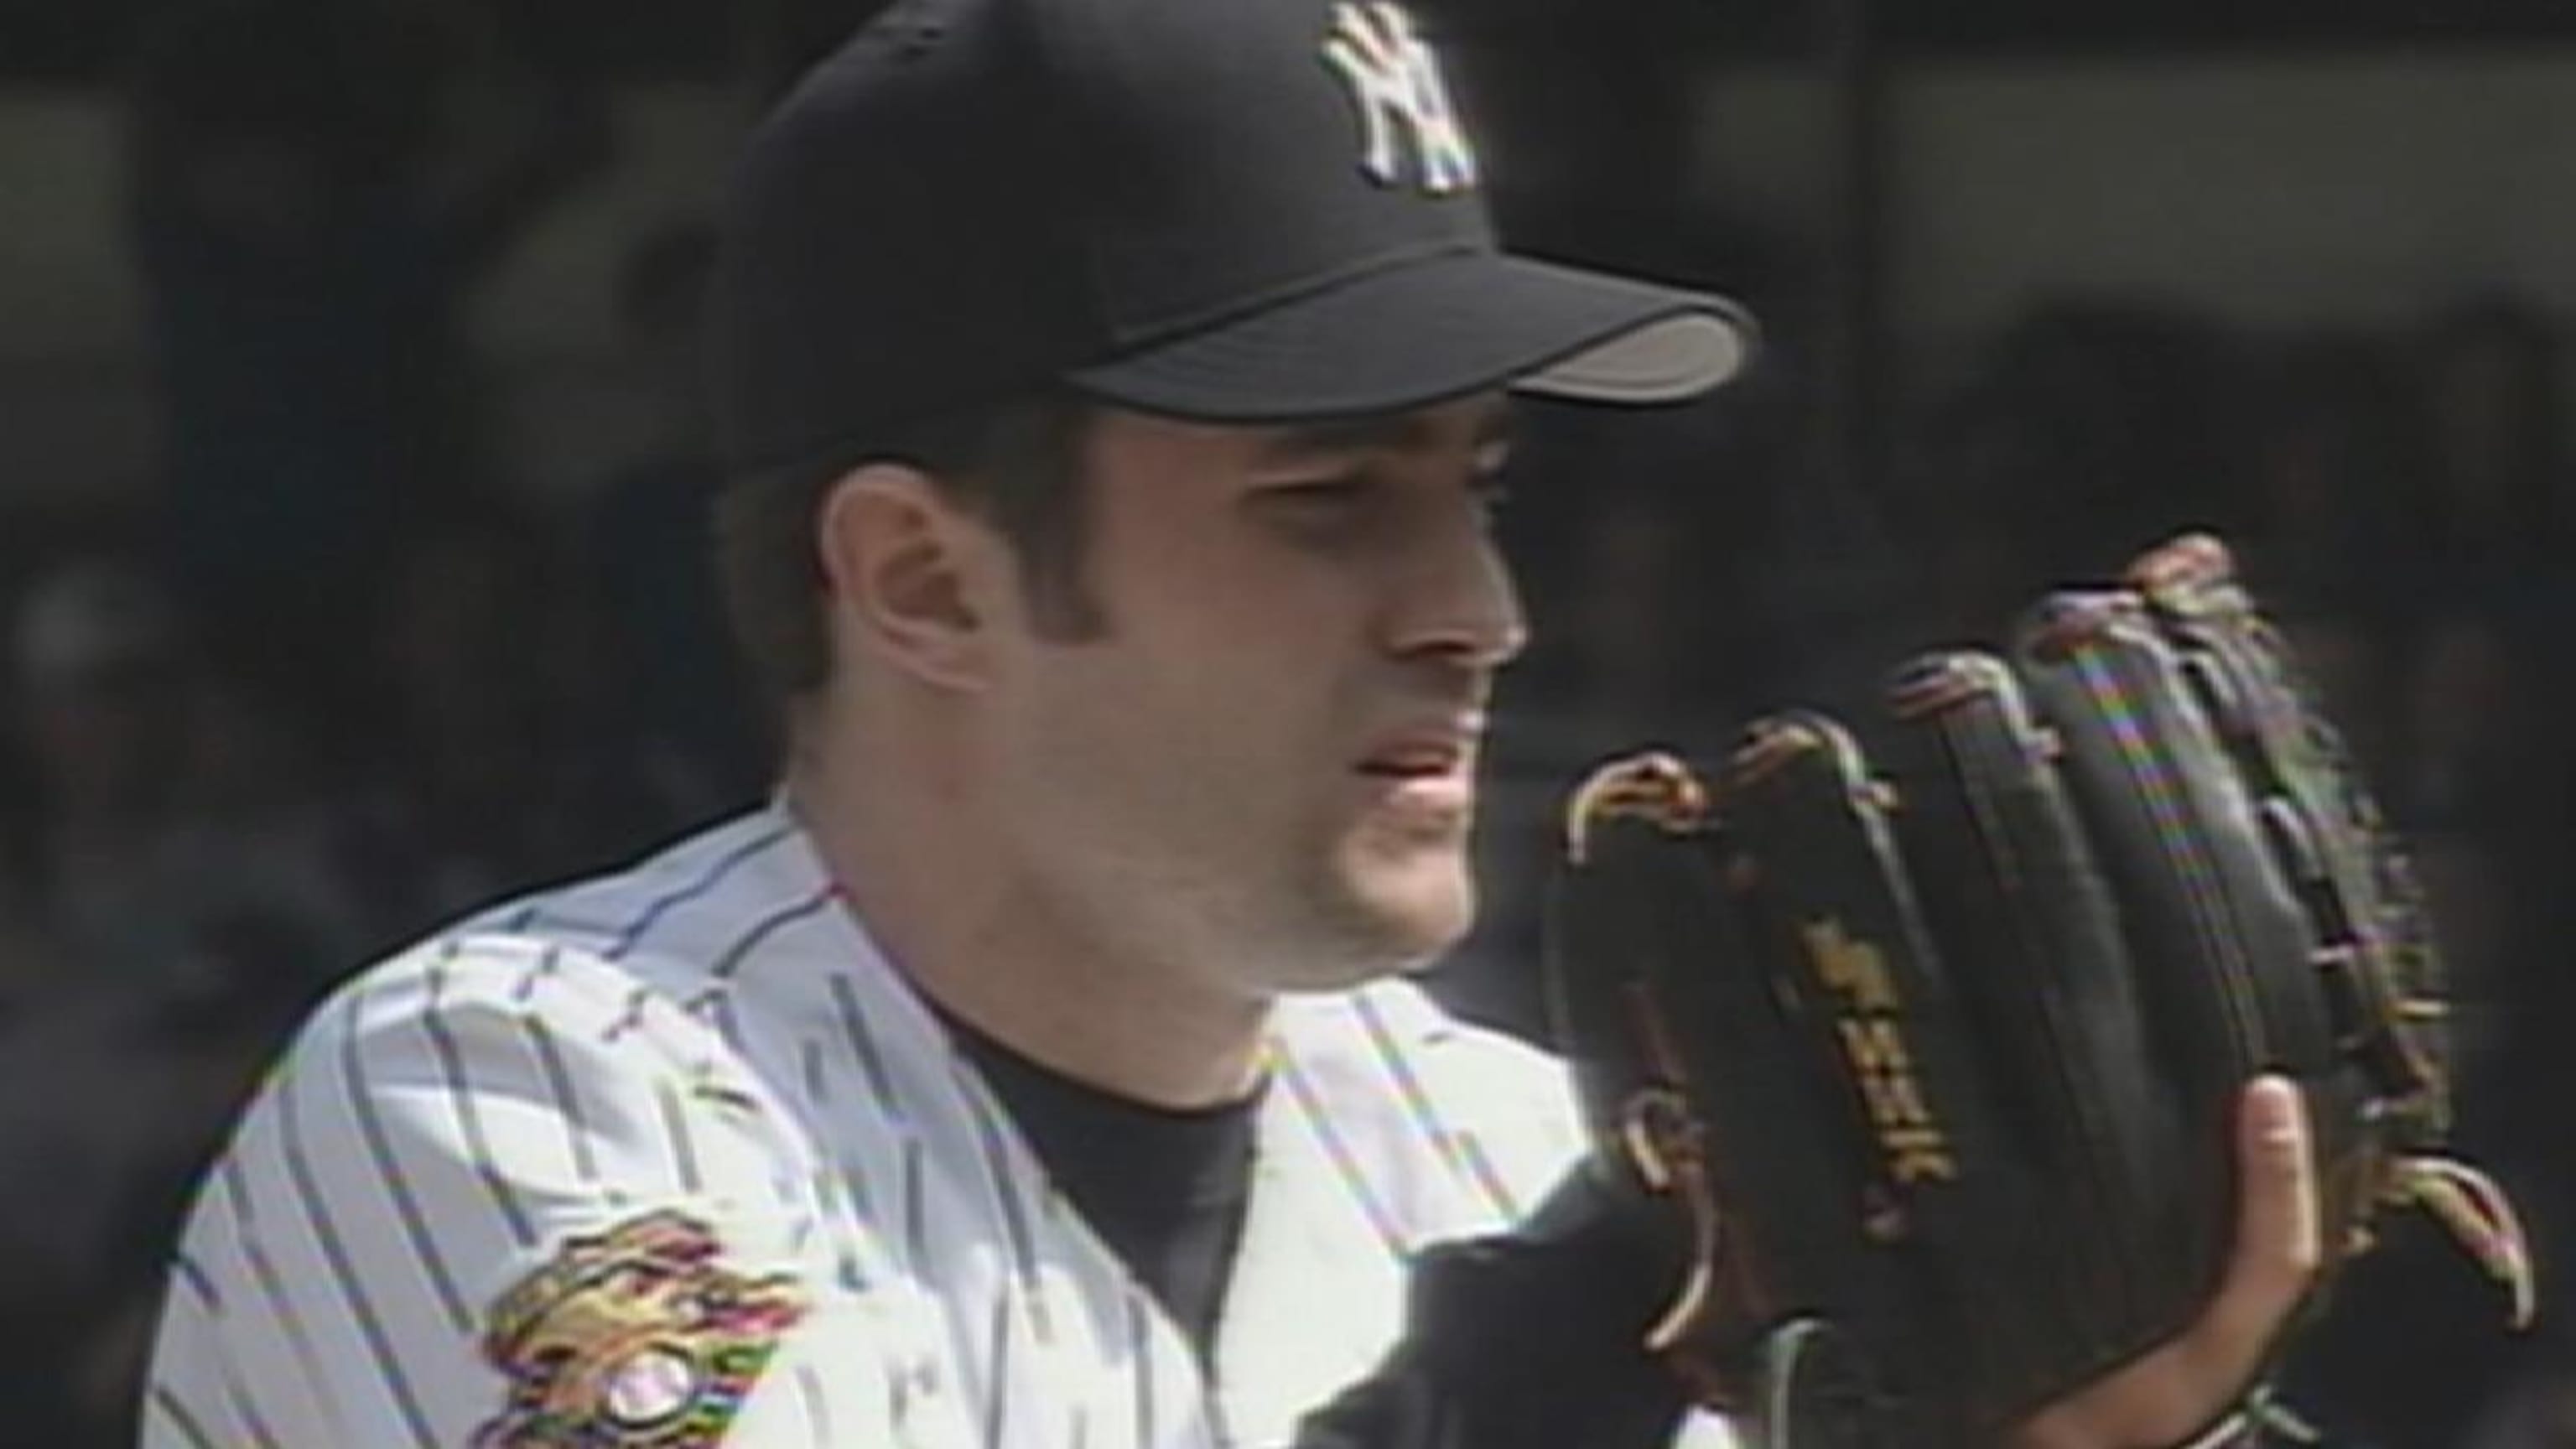 Mike Mussina near perfect game streaming on MLB